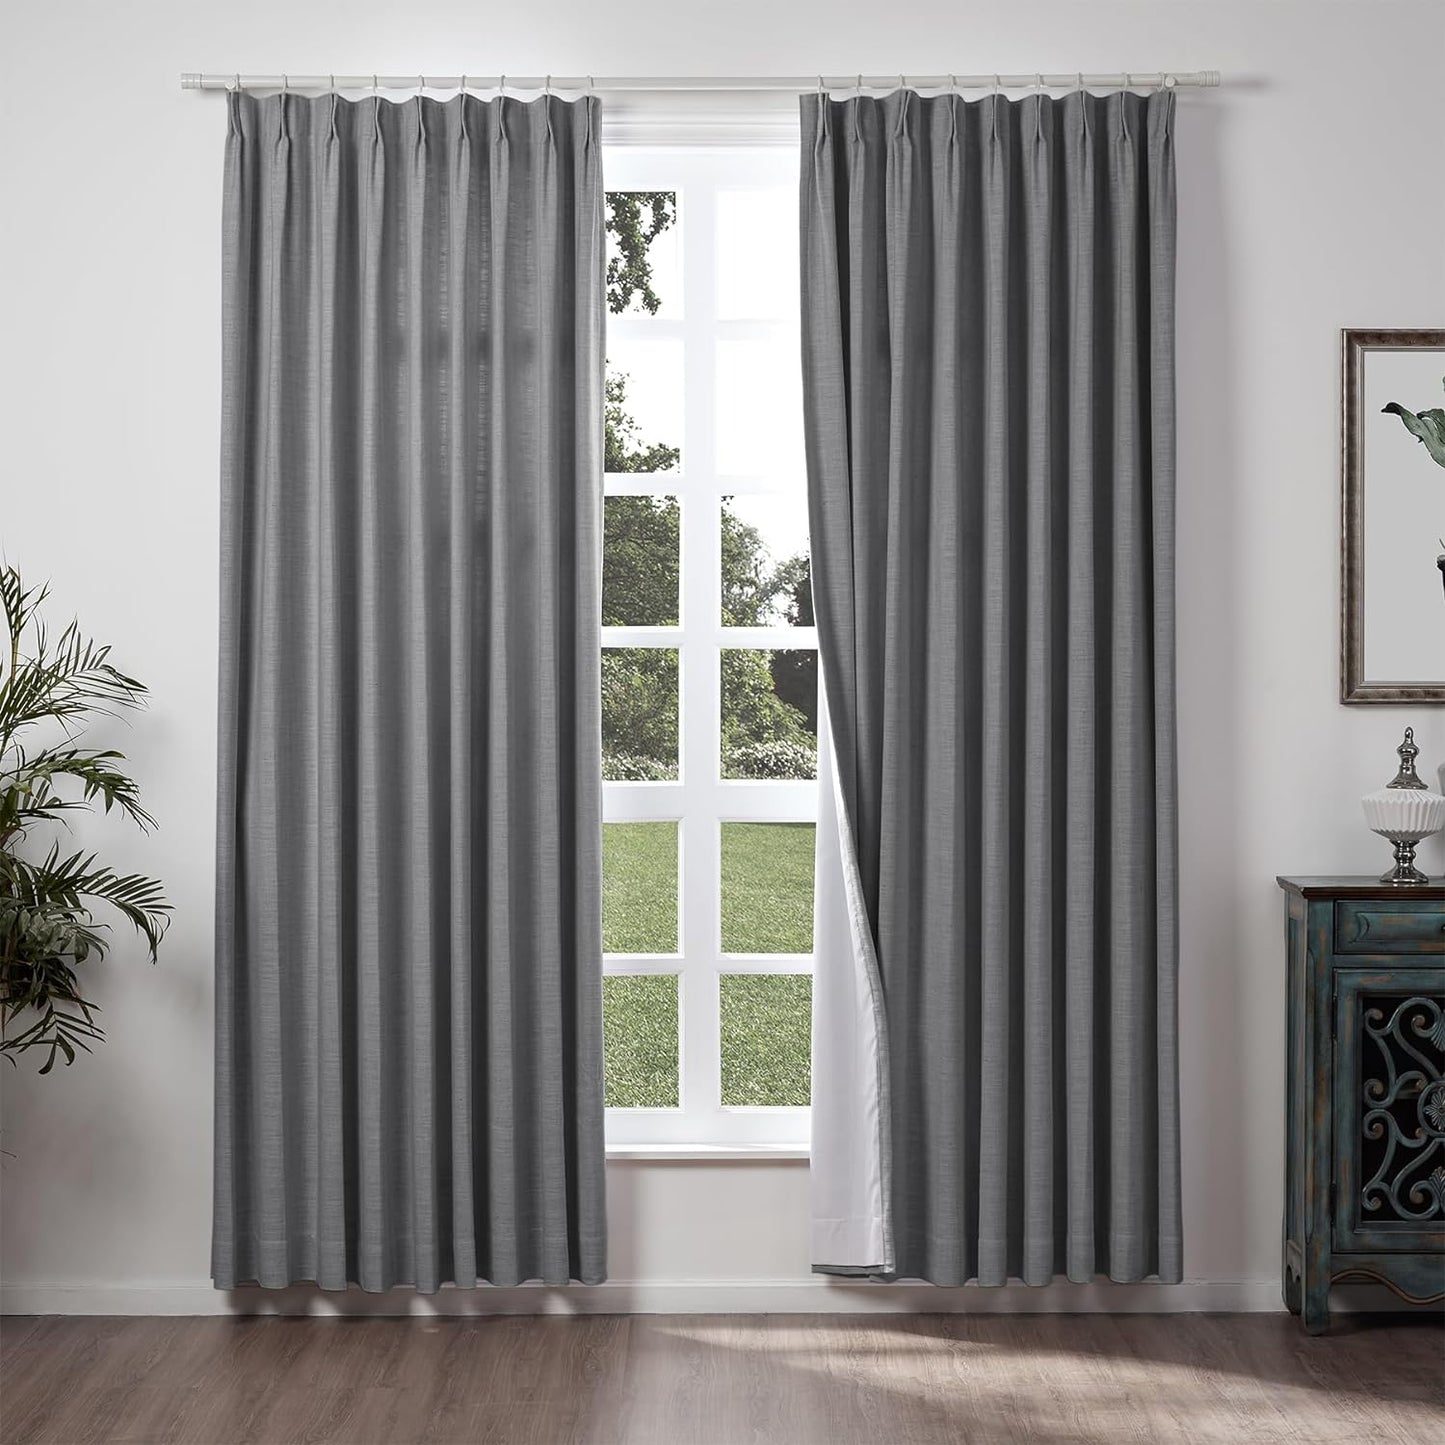 Chadmade 50" W X 63" L Polyester Linen Drape with Blackout Lining Pinch Pleat Curtain for Sliding Door Patio Door Living Room Bedroom, (1 Panel) Sand Beige Tallis Collection  ChadMade Carbon Grey (16) 50Wx84L 